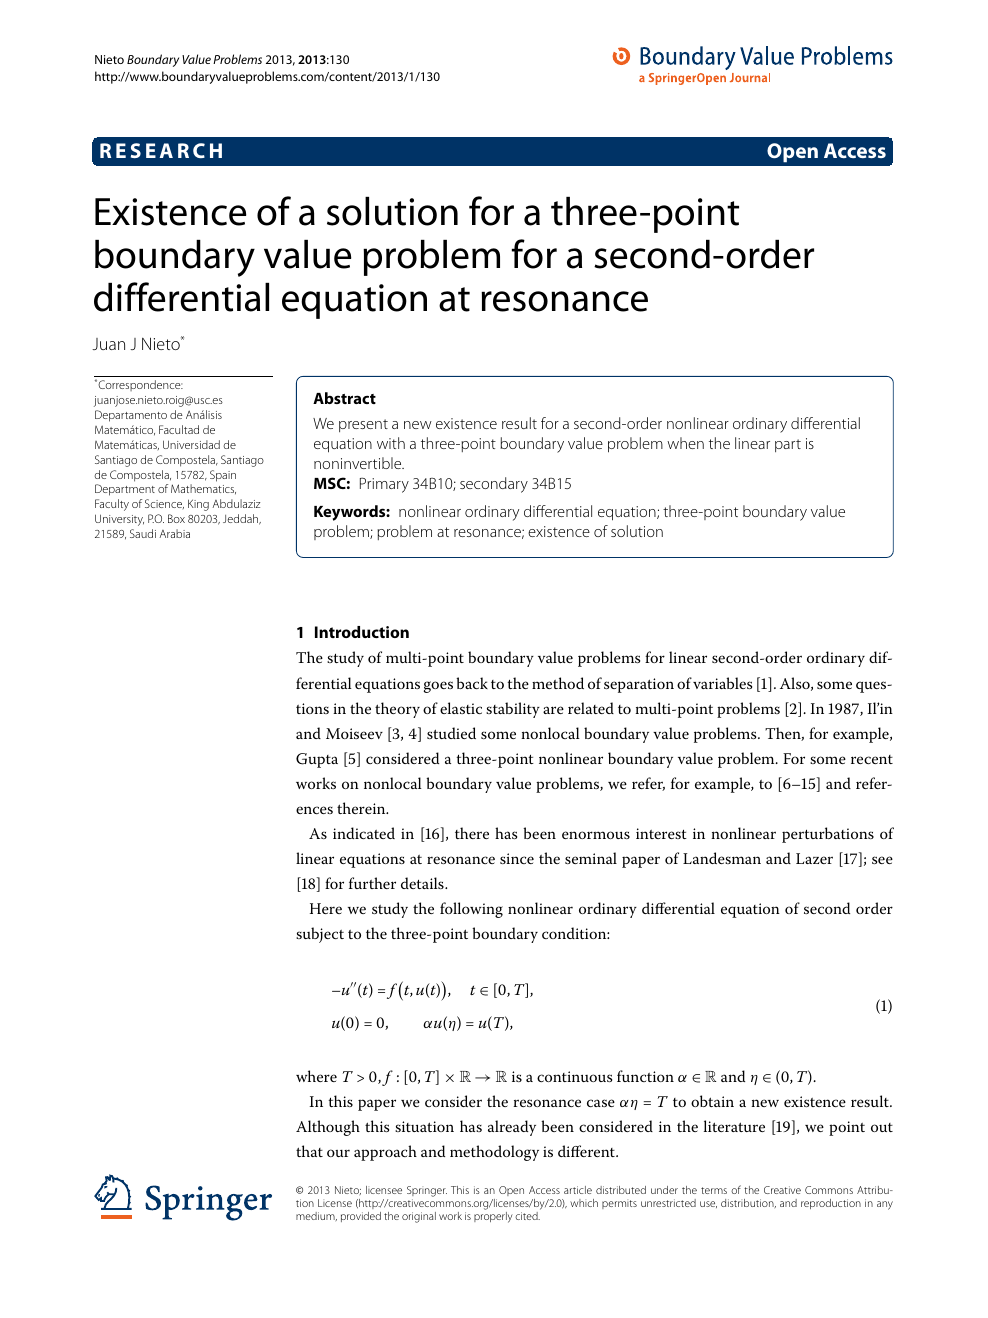 Existence Of A Solution For A Three Point Boundary Value Problem For A Second Order Differential Equation At Resonance Topic Of Research Paper In Mathematics Download Scholarly Article Pdf And Read For Free